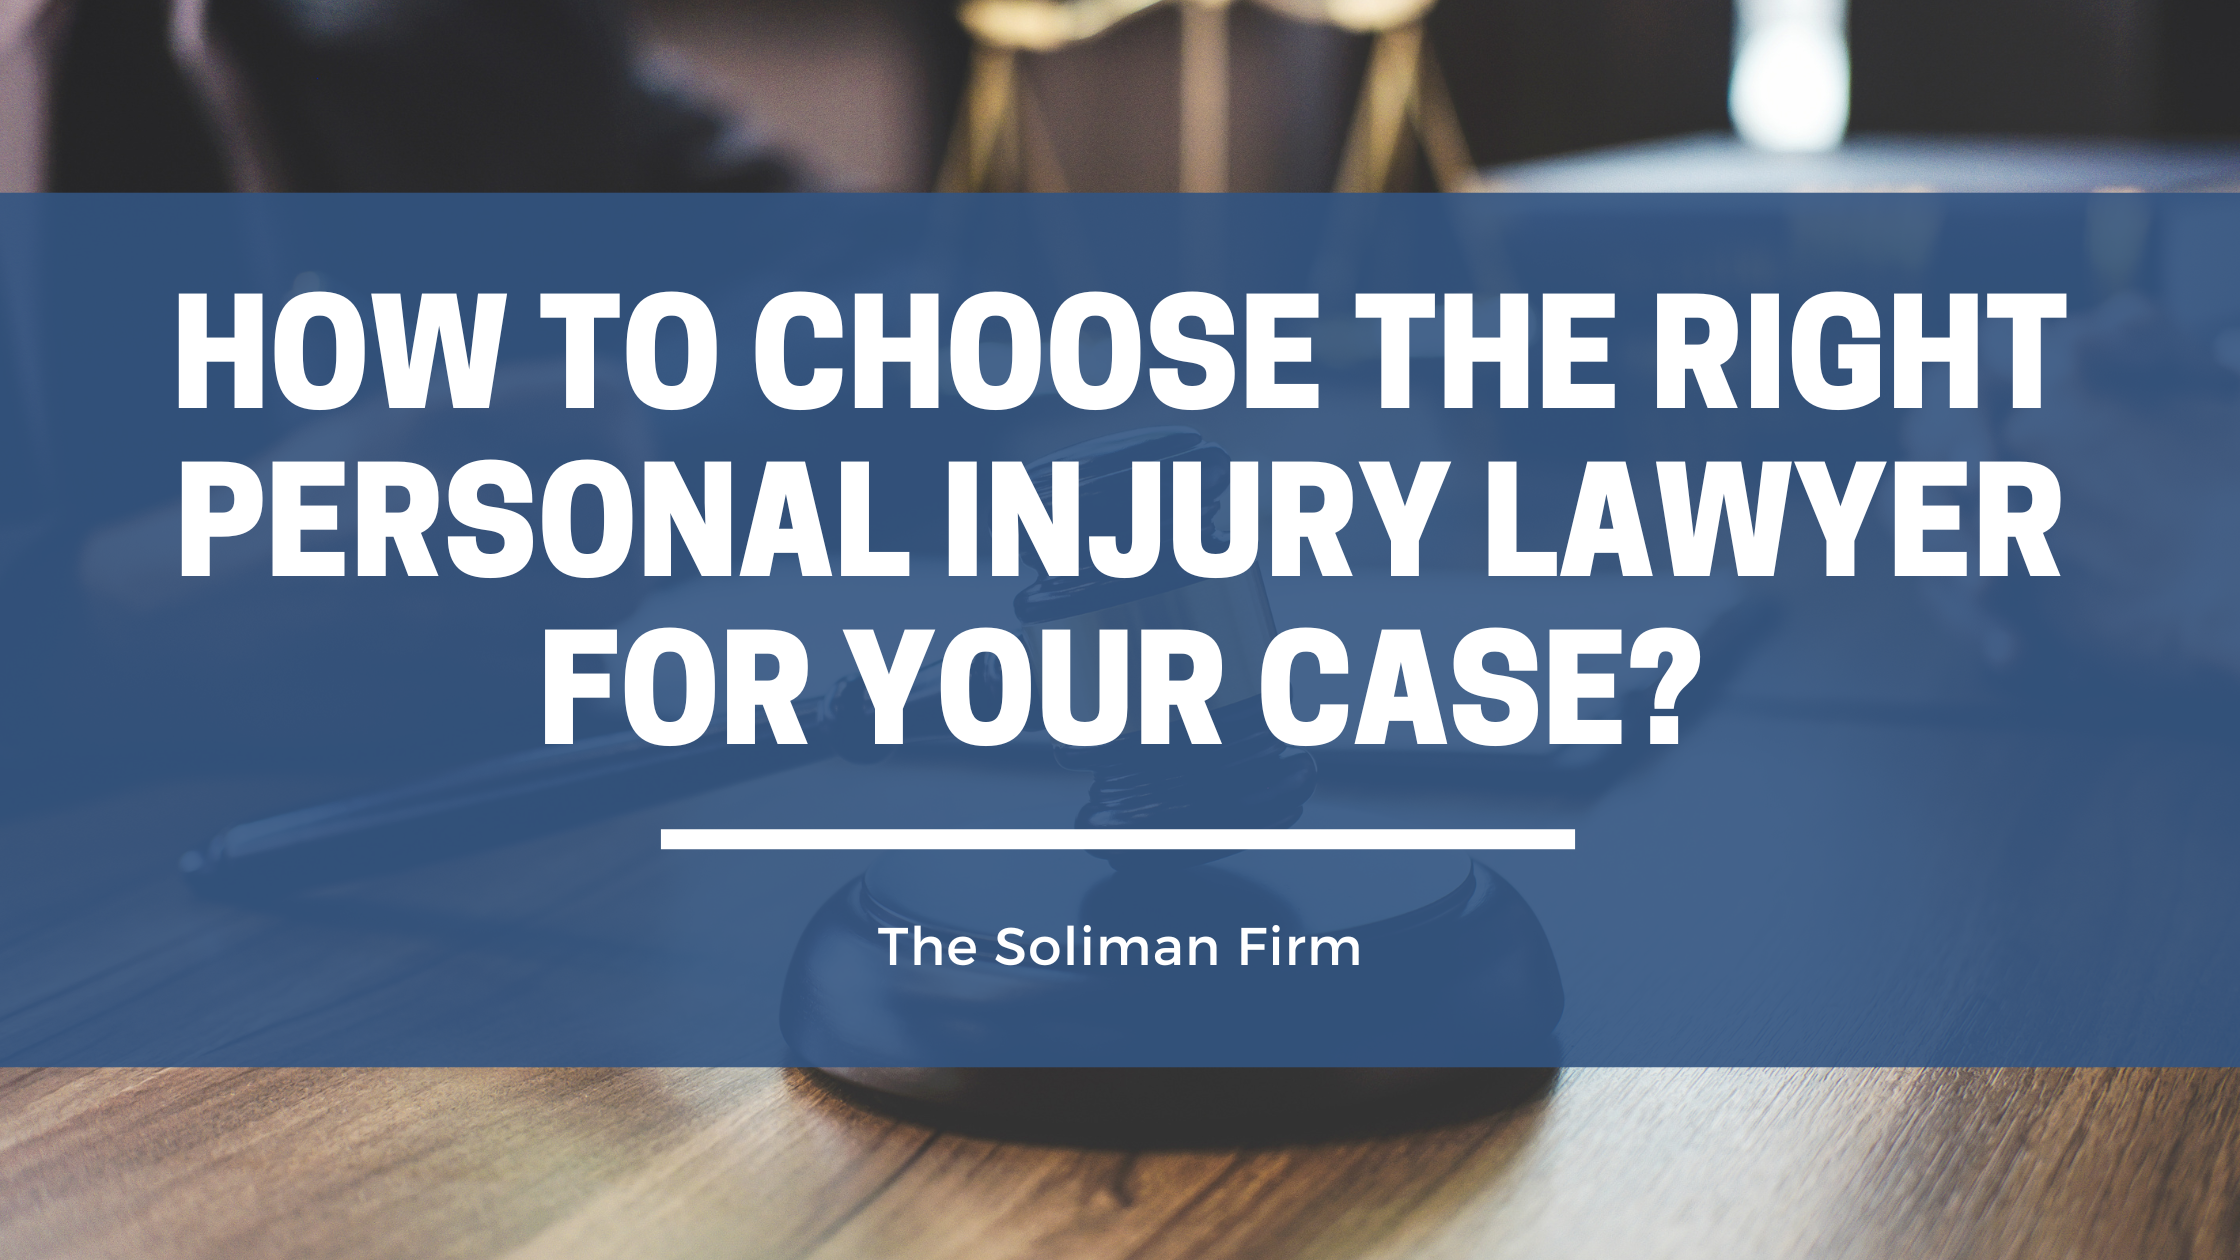 How to choose the right personal injury lawyer for your case